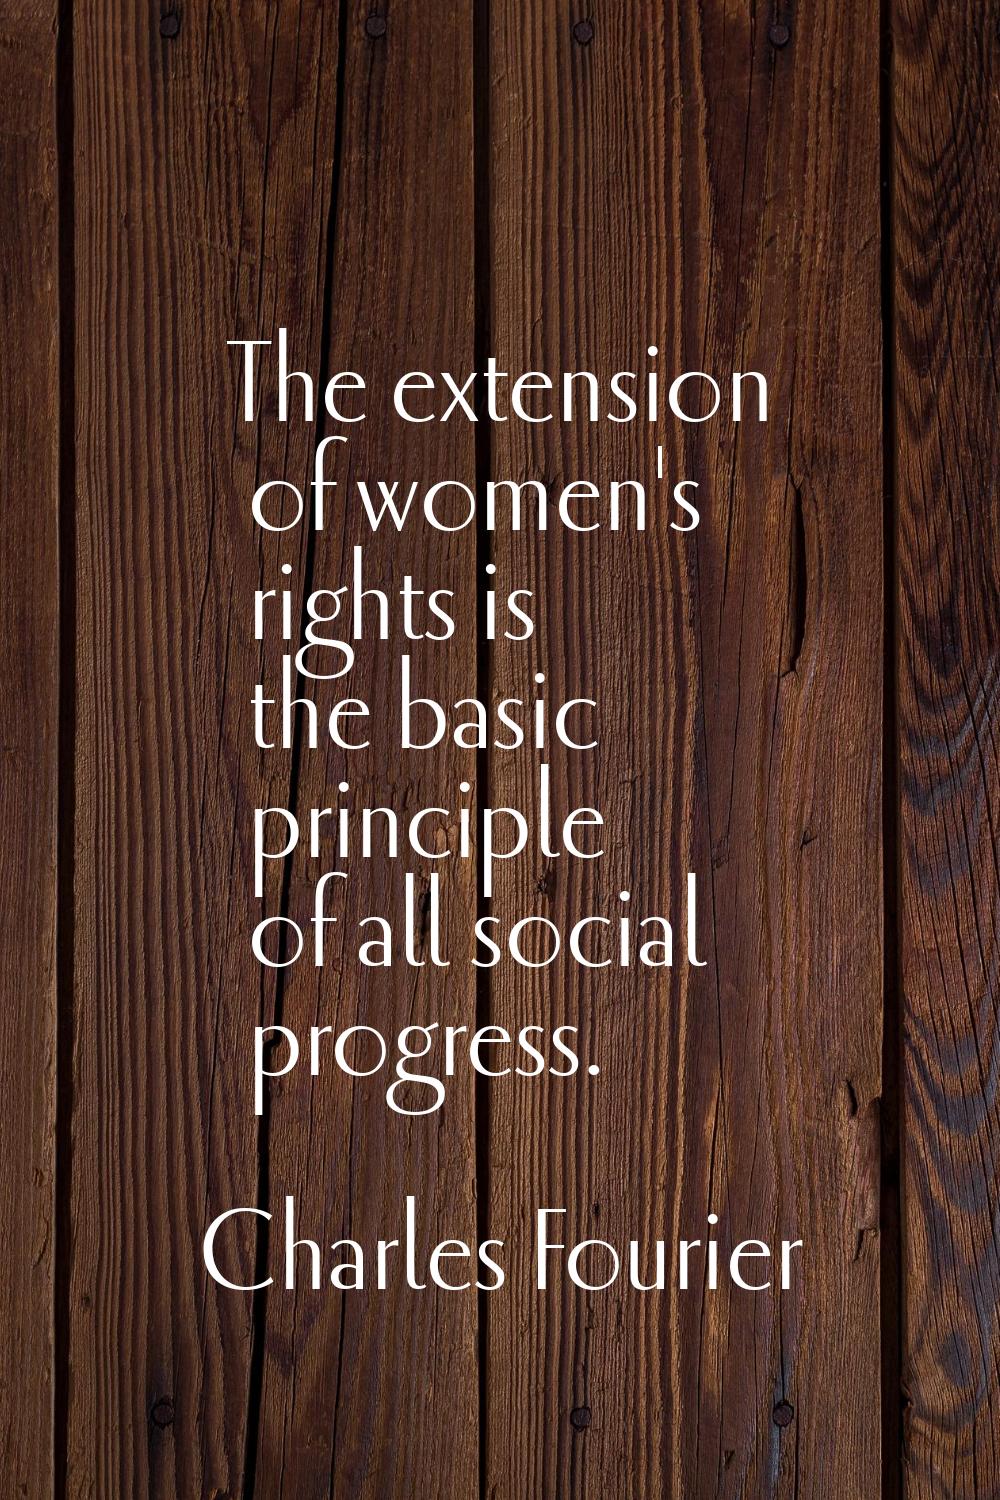 The extension of women's rights is the basic principle of all social progress.